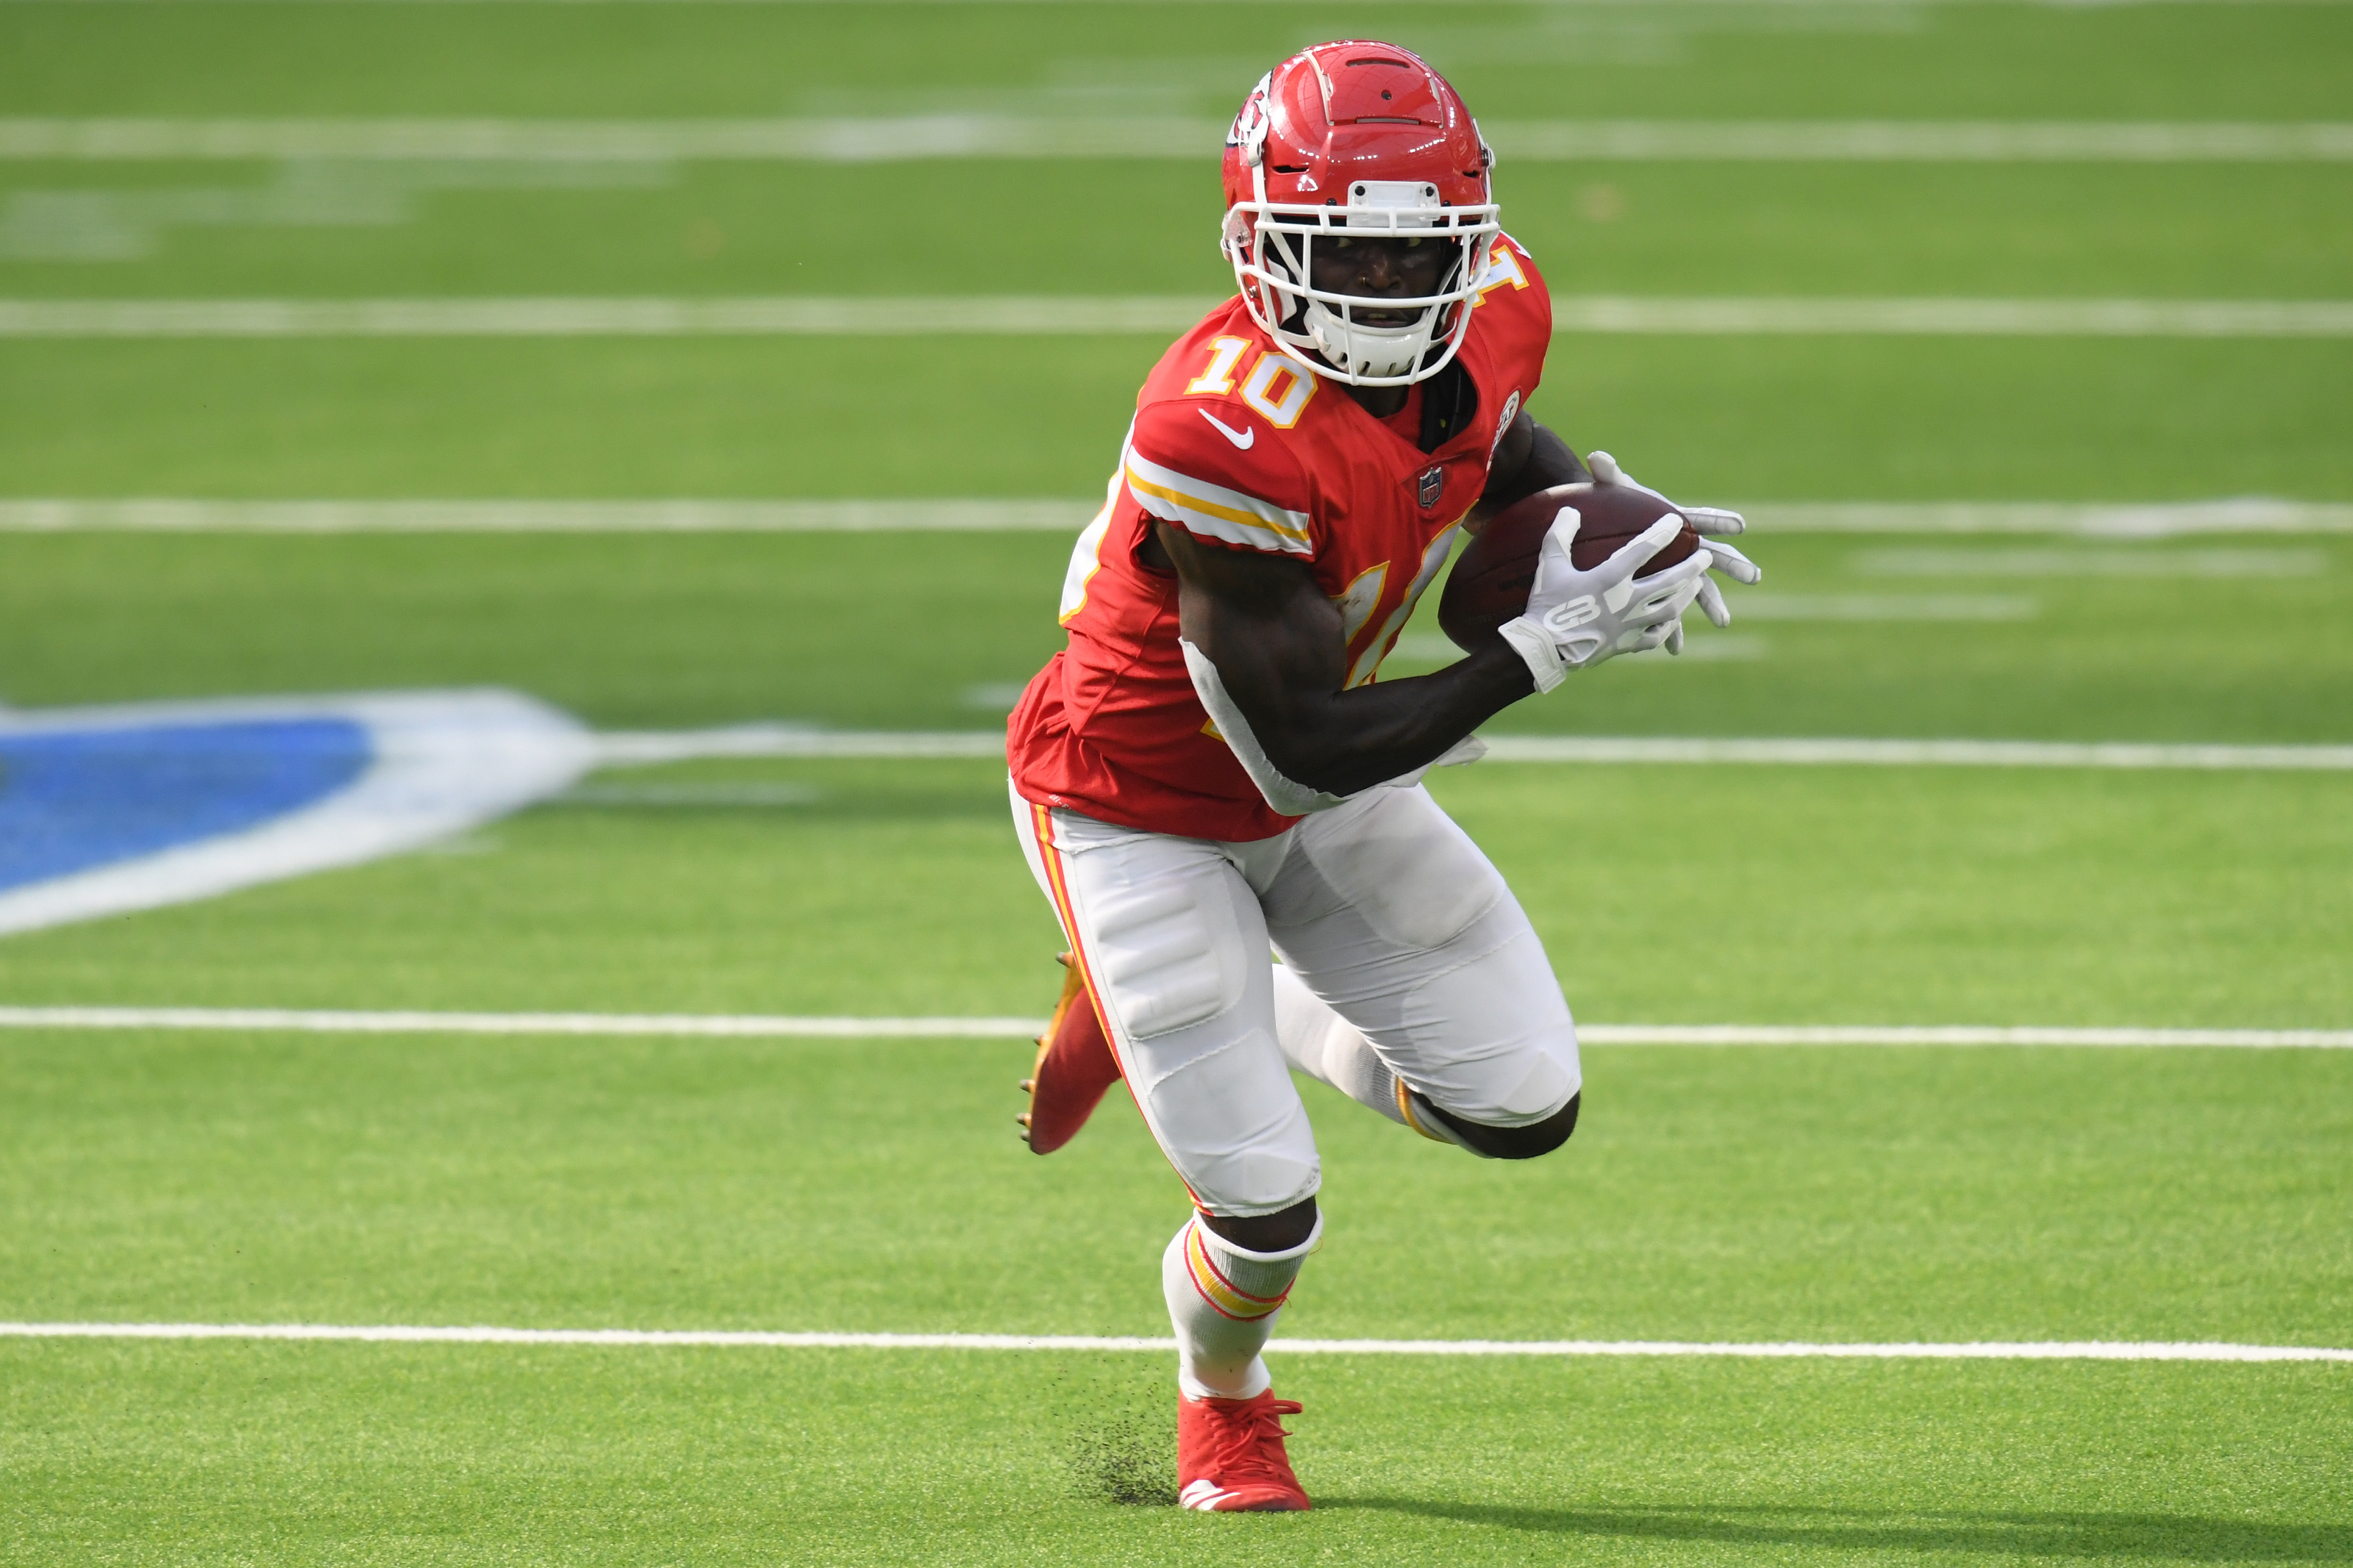 Kansas City Chiefs: 5 star performances vs Chargers in week 2